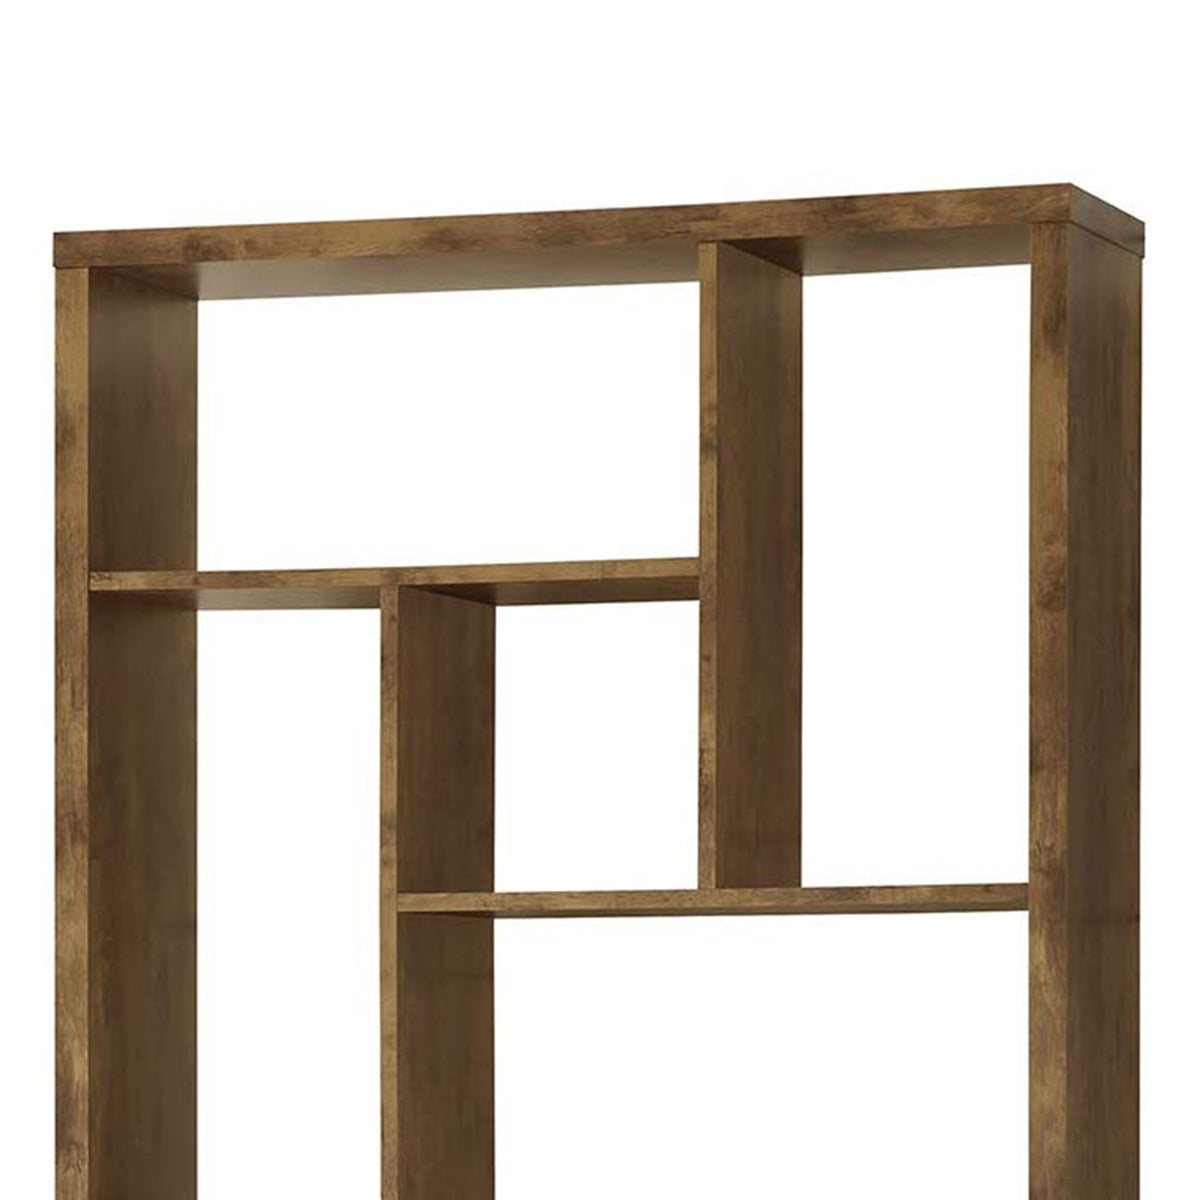 Metal and Wood Modern Style Bookcase with Multiple Shelves, Brown - BM159134